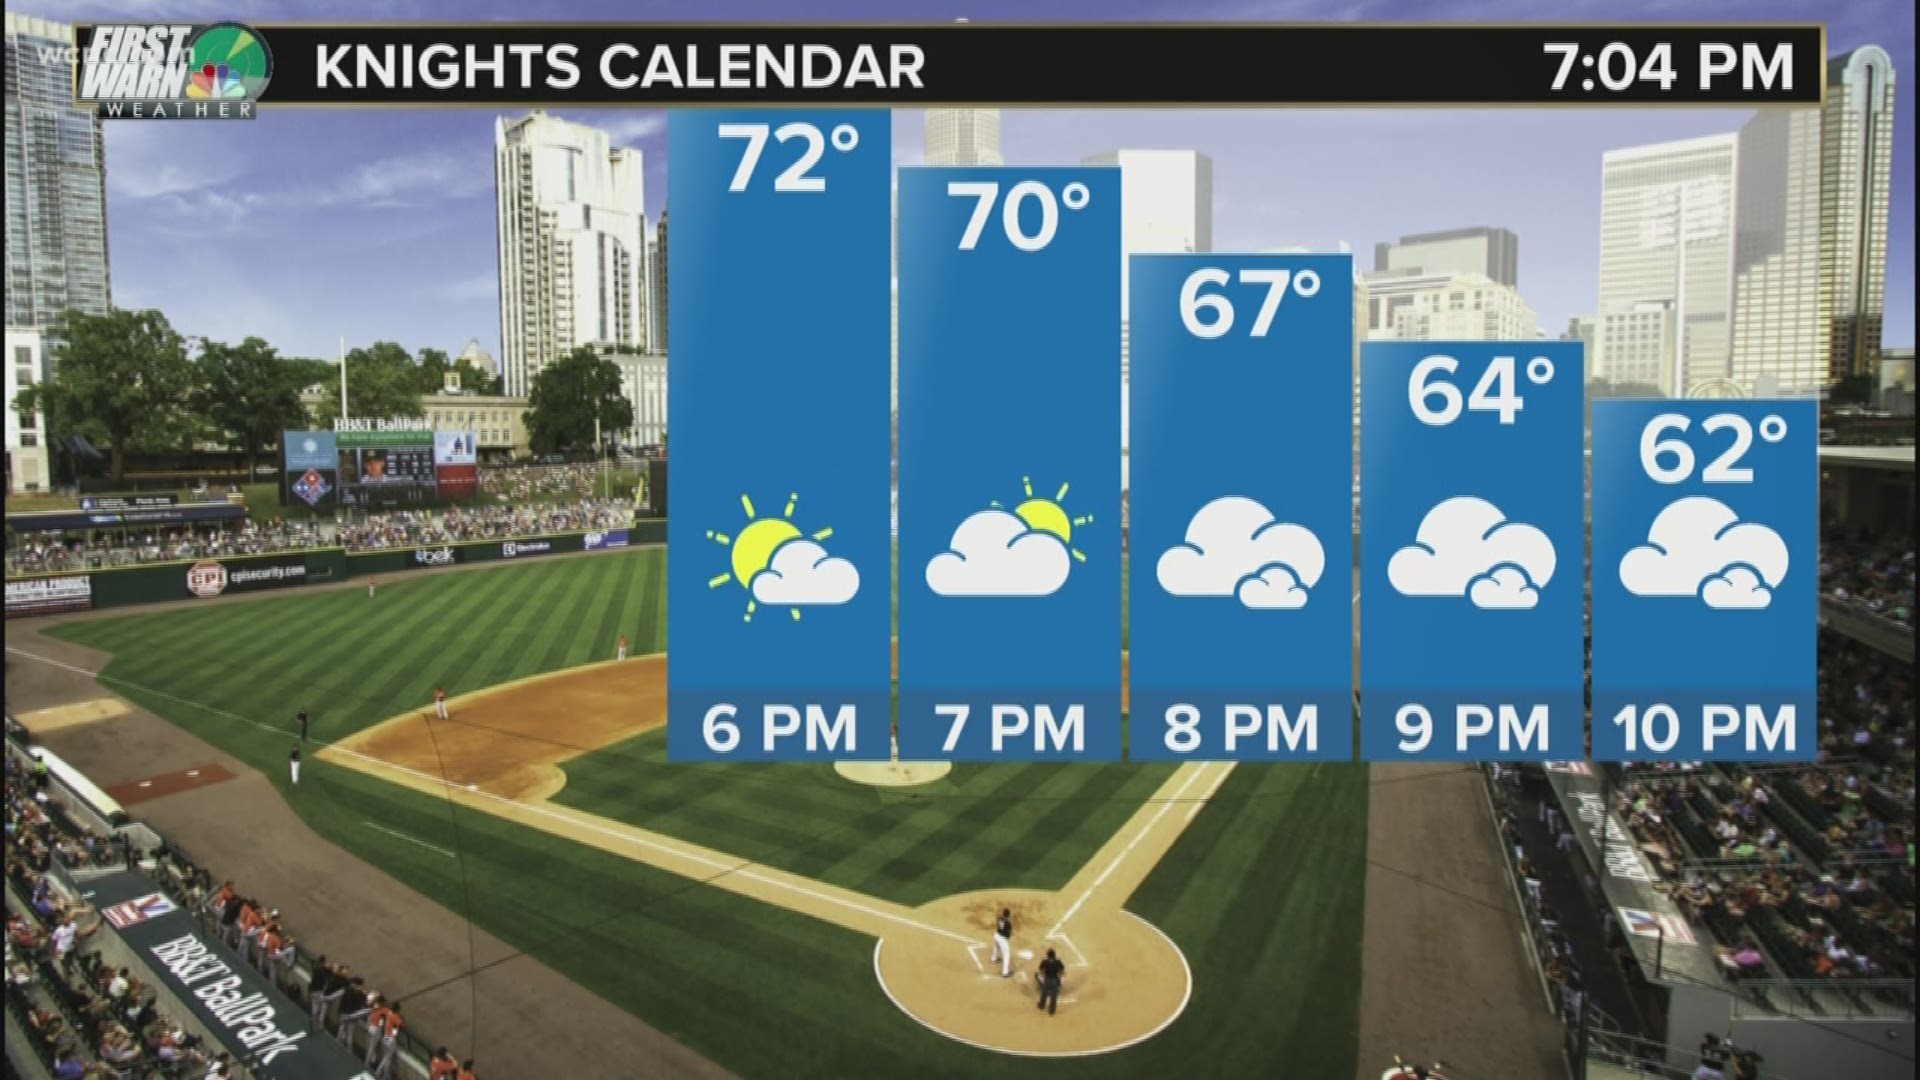 It's going to be a beautiful night for baseball in Charlotte as the Knights open their season against the Durham Bulls at BB&T Ballpark in uptown.